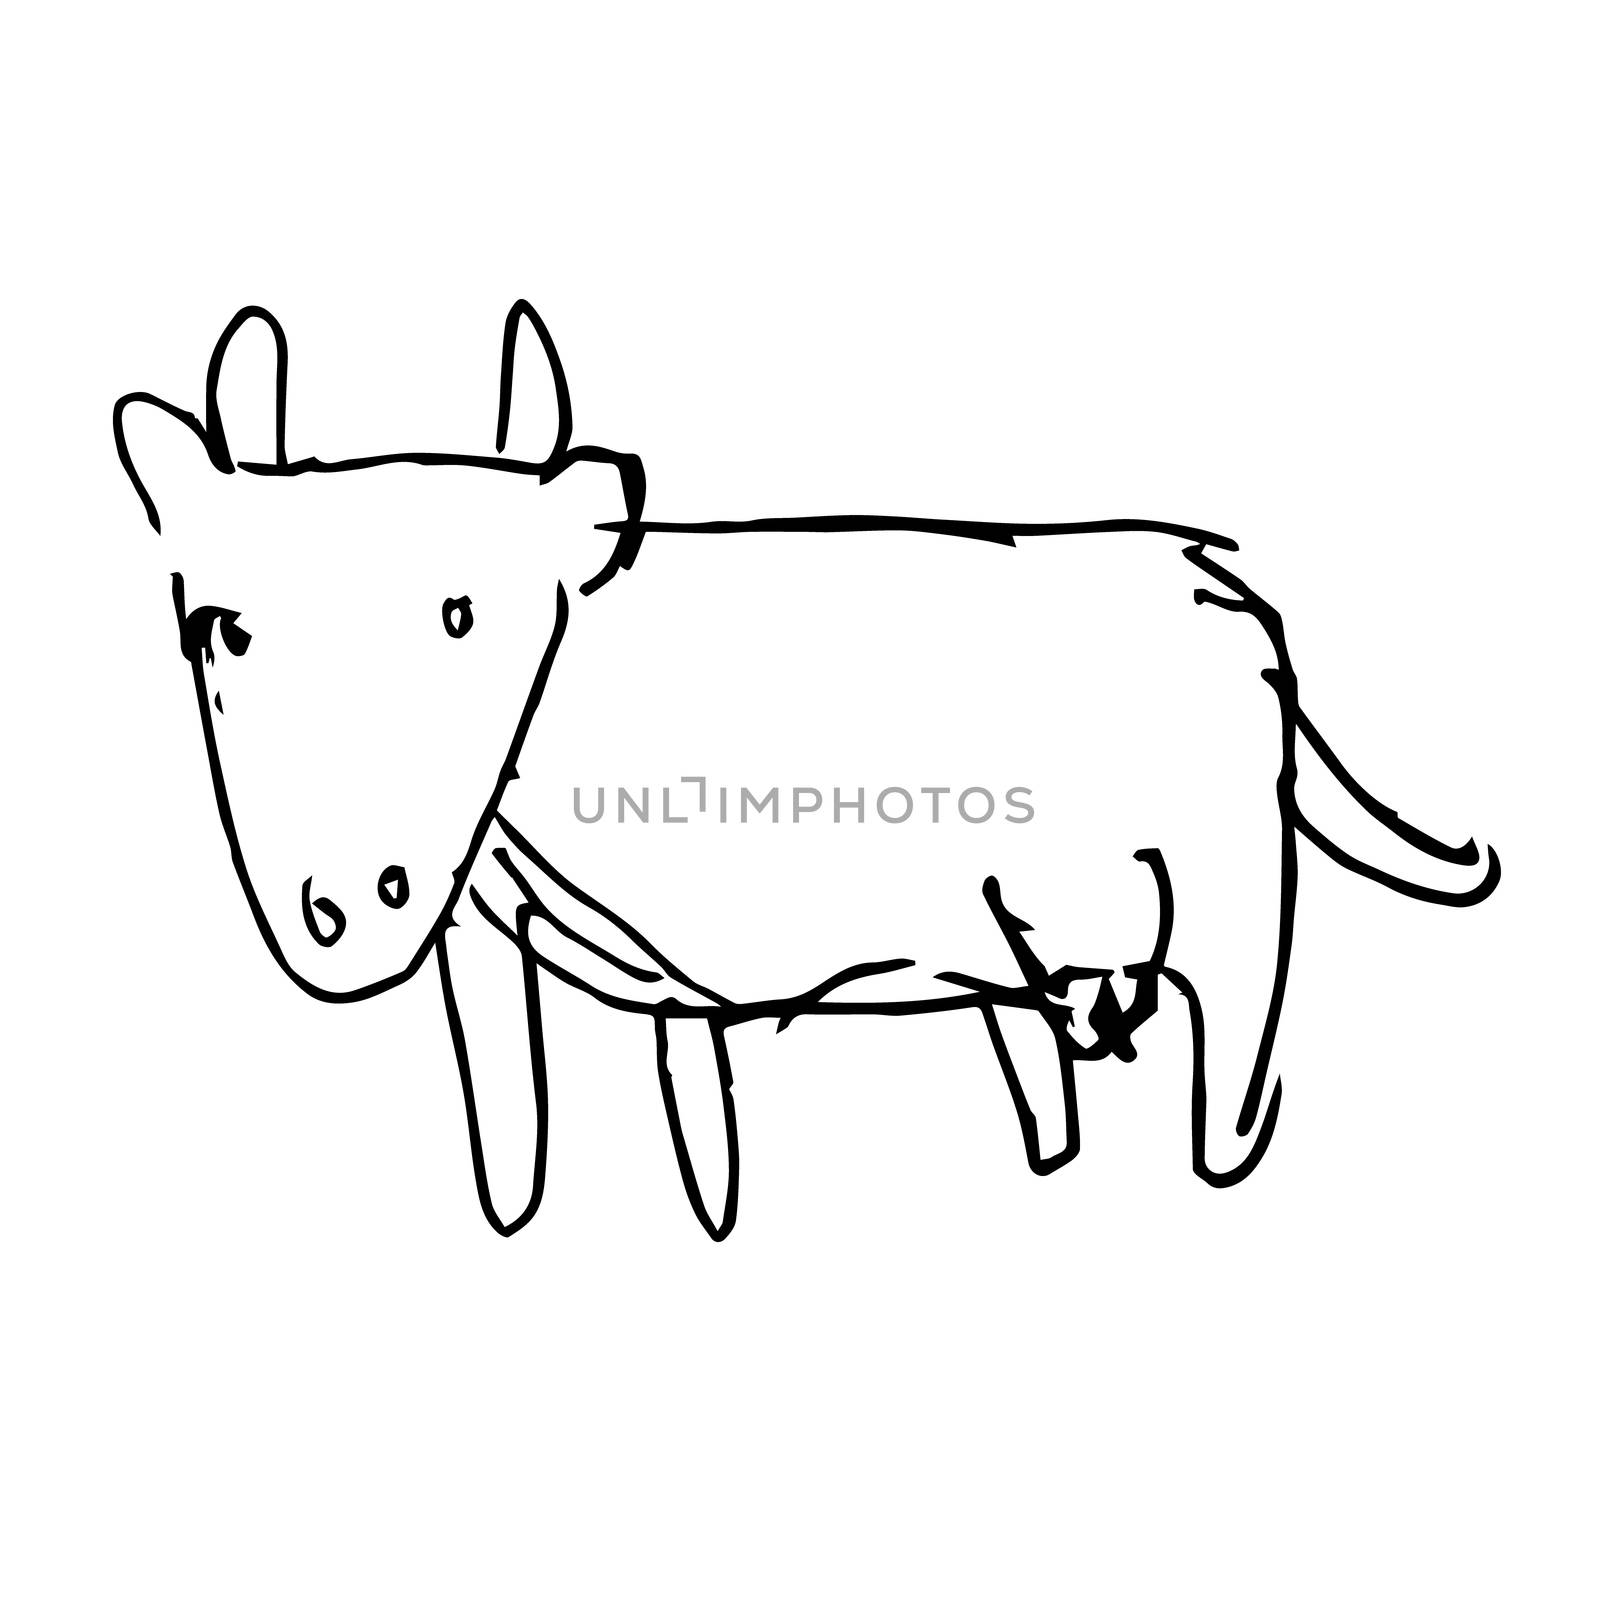 freehand sketch illustration of cow doodle hand drawn in kid style